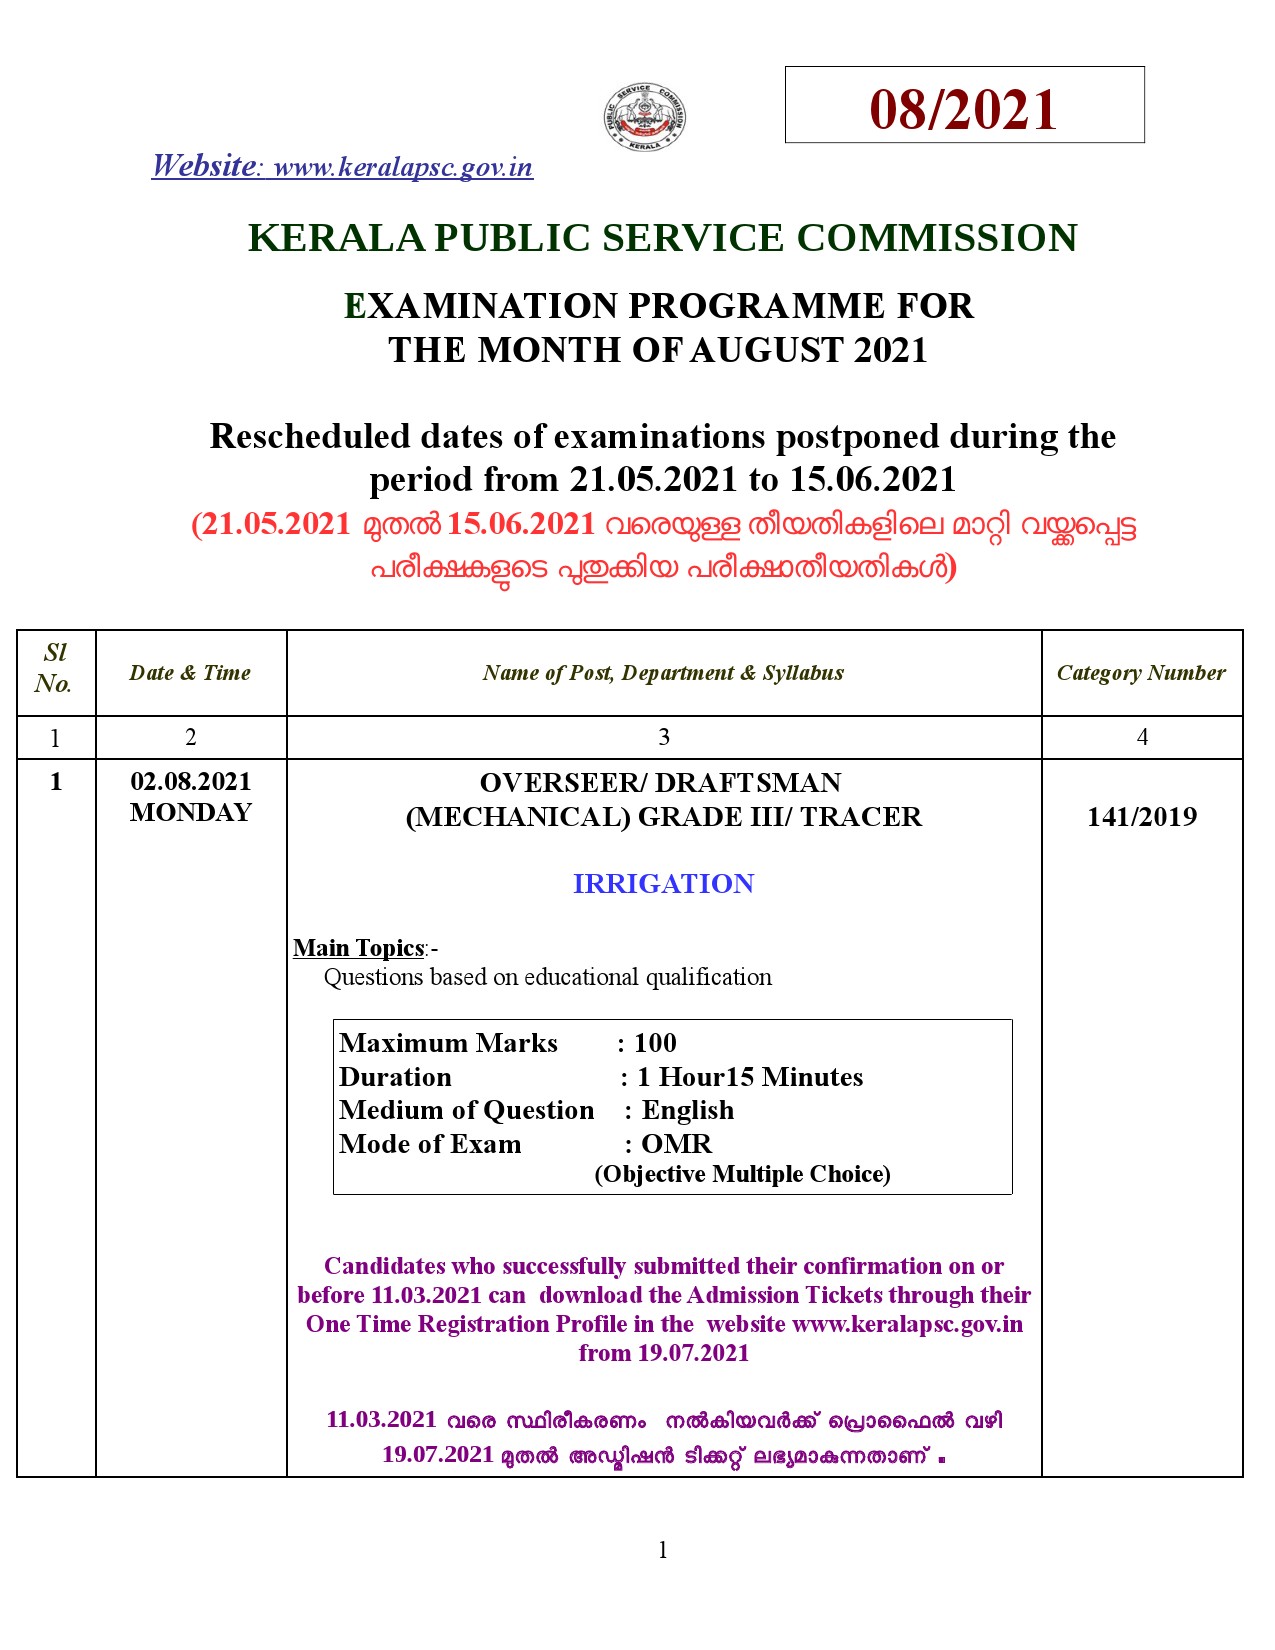 KPSC Examination Programme For The Month Of August 2021 - Notification Image 1